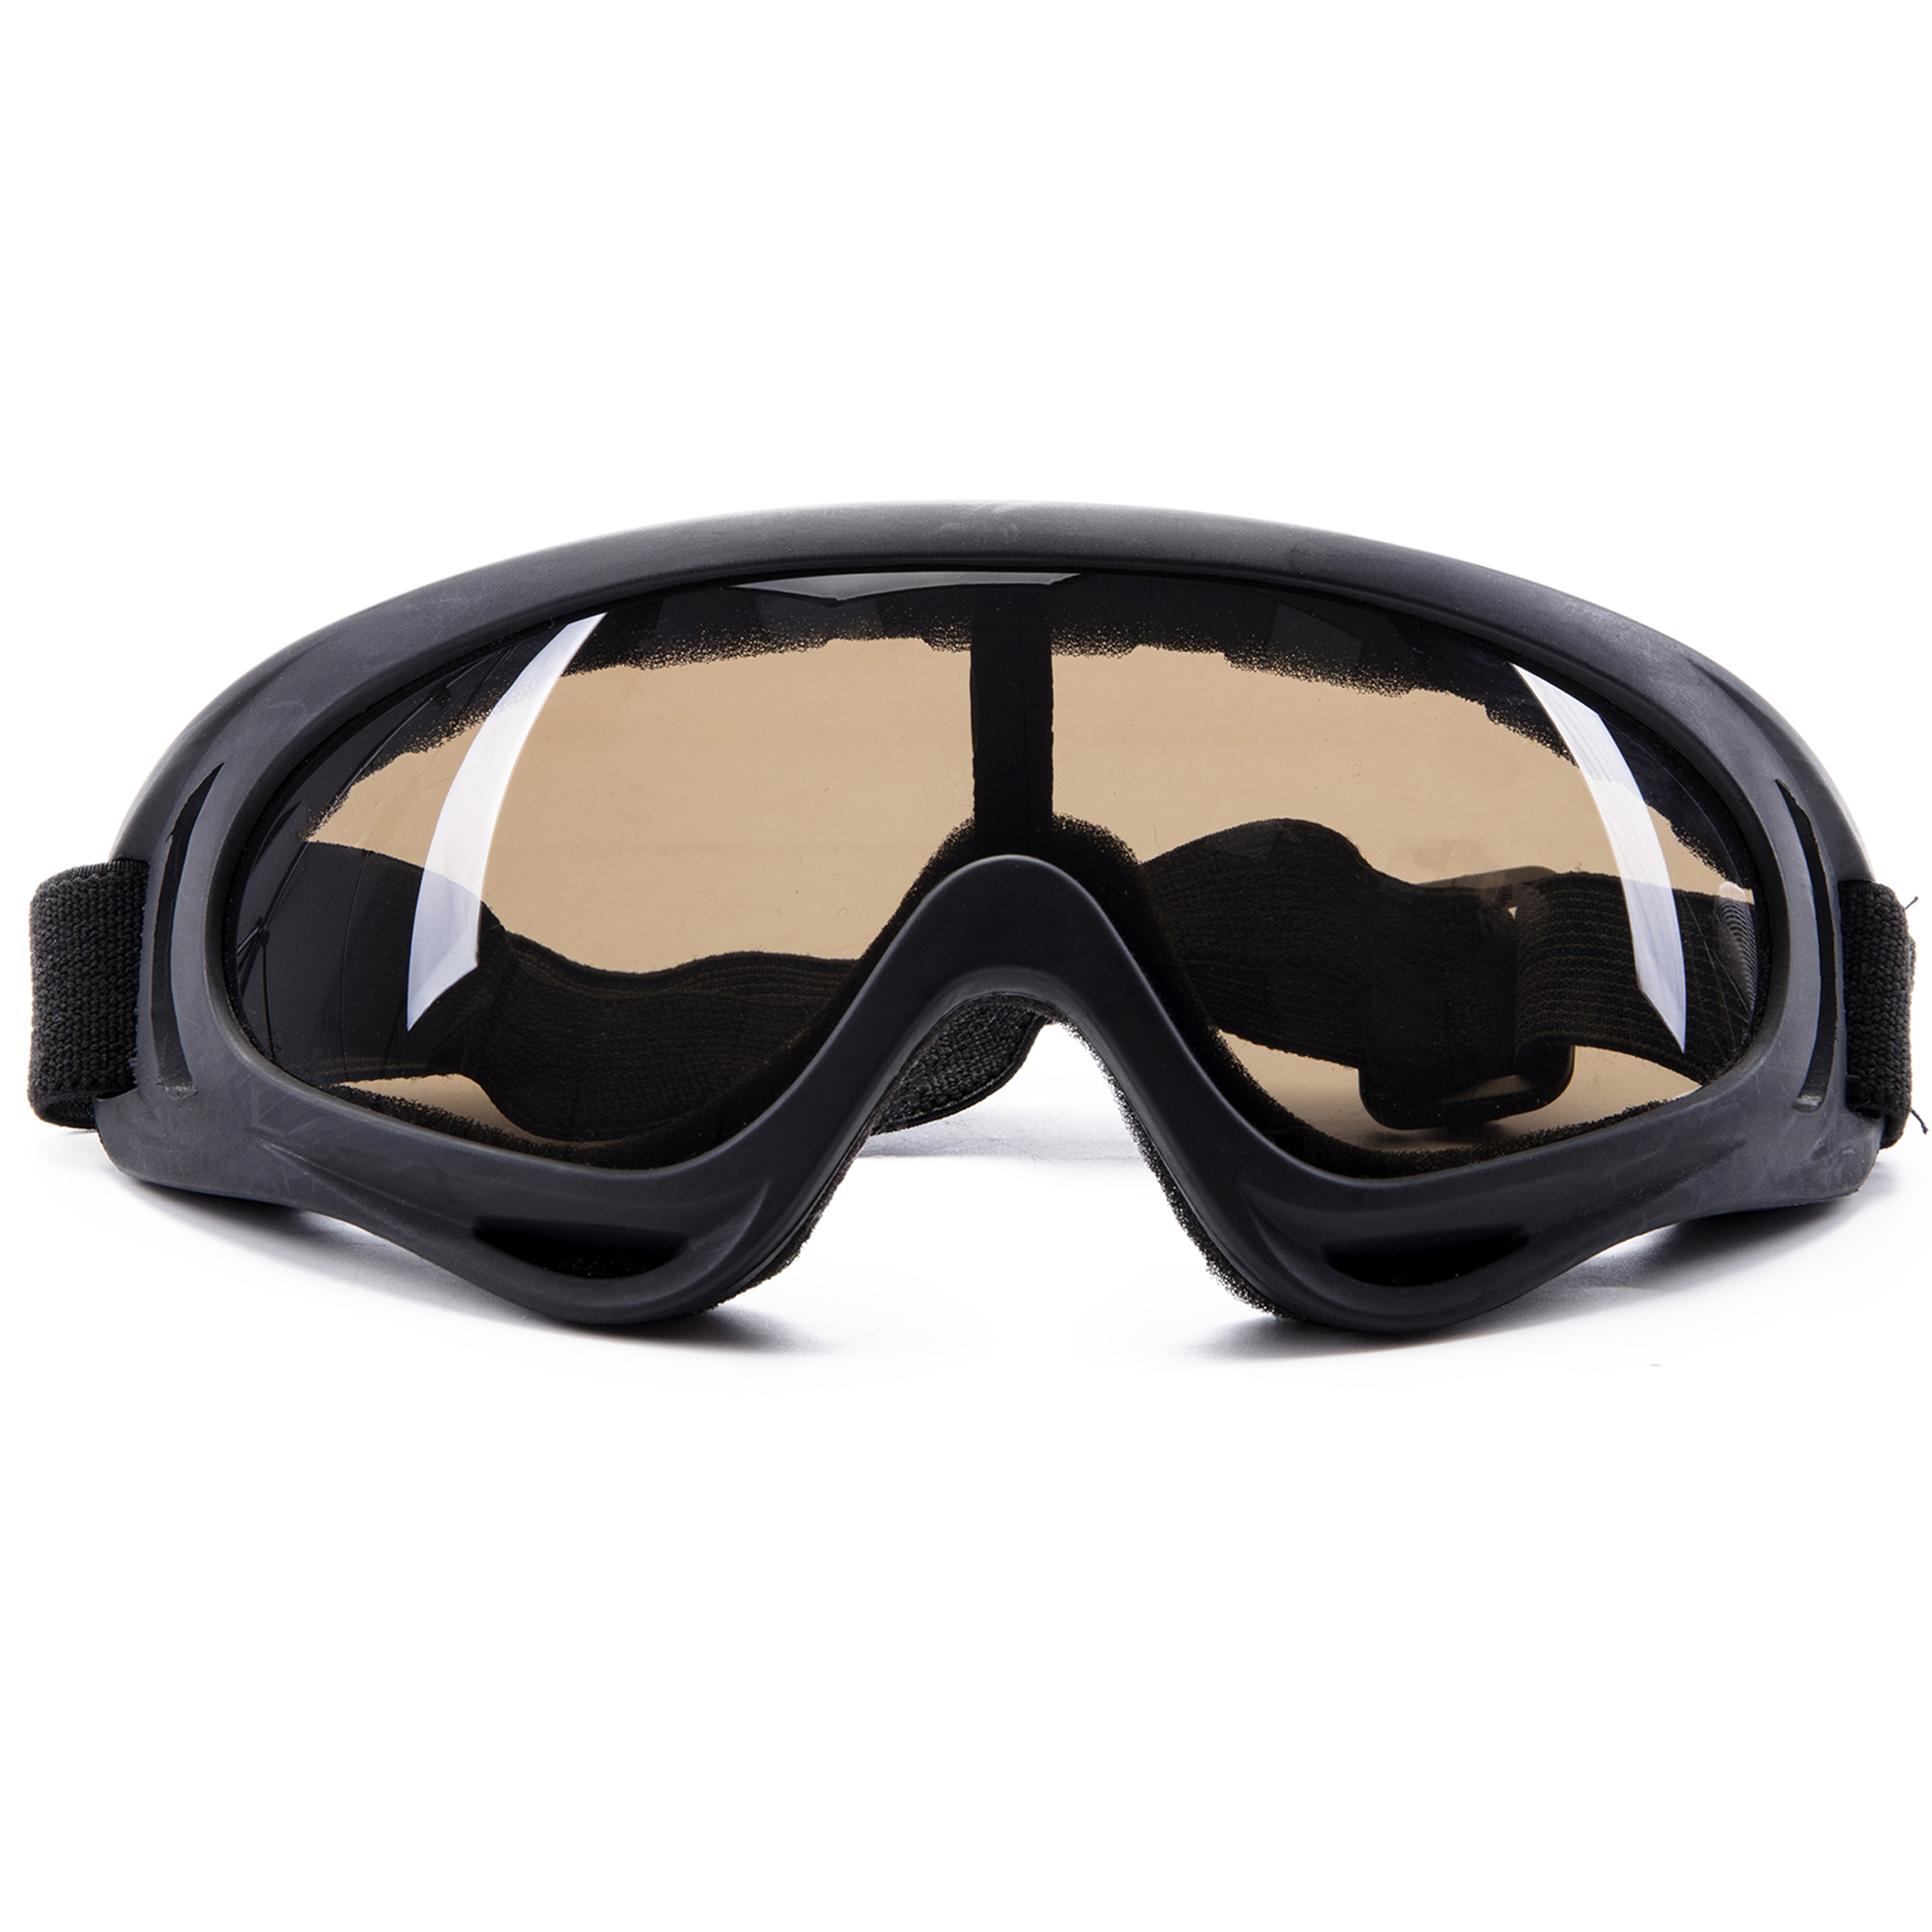 LELINTA Ski Snowboard Goggles UV Protection Anti-Fog Snow Goggles Winter Outdoor Sports Skiing Snowboard Goggles for Men Women Youth - image 3 of 7